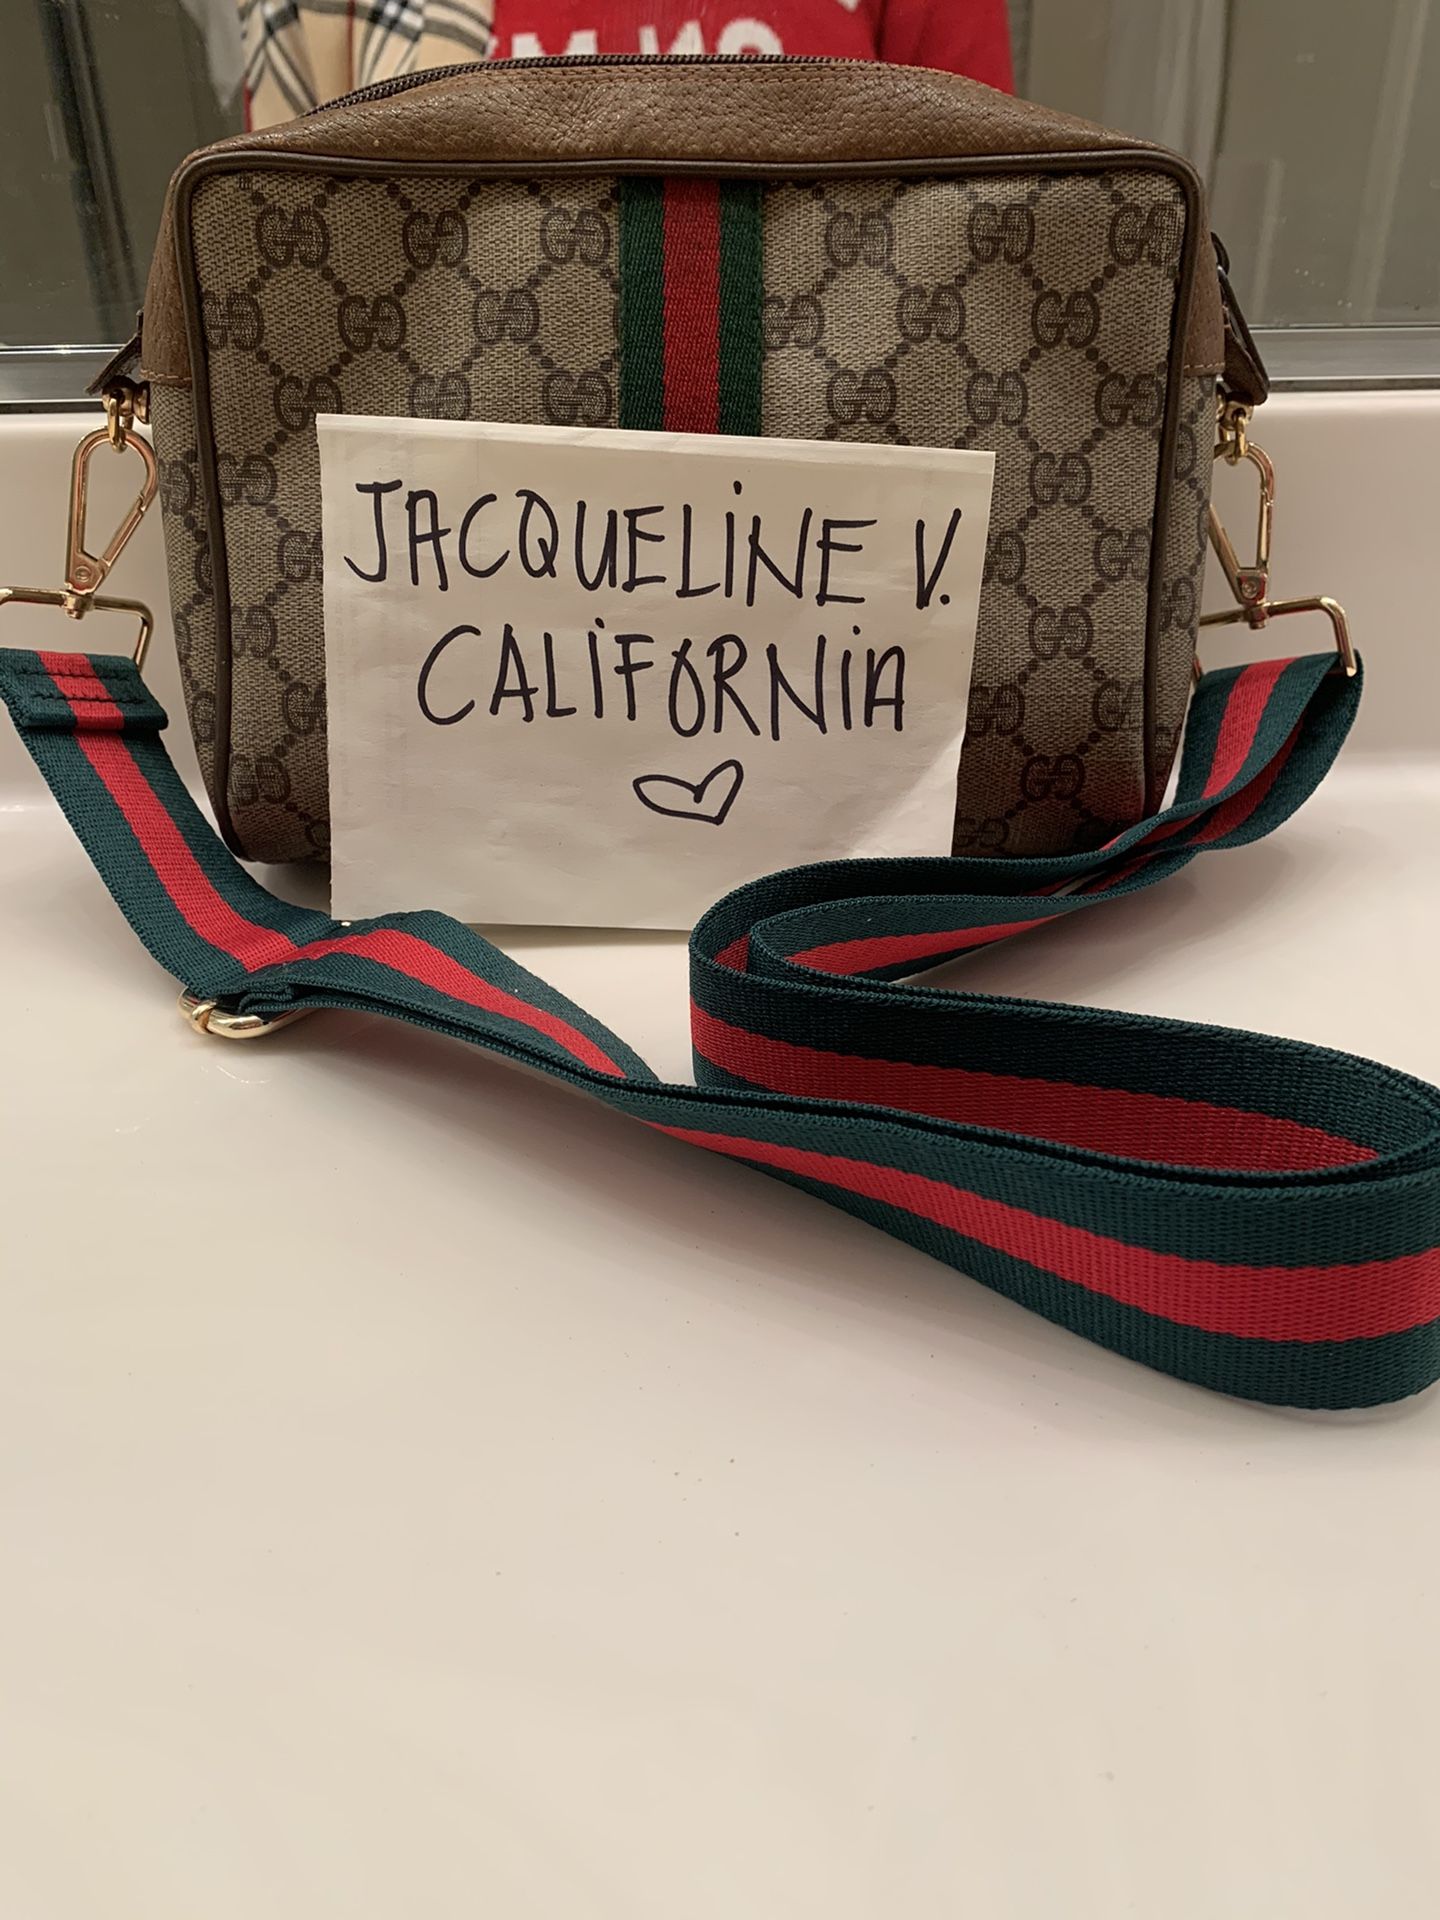 Authentic Gucci Sherryline pouch/crossbody bag